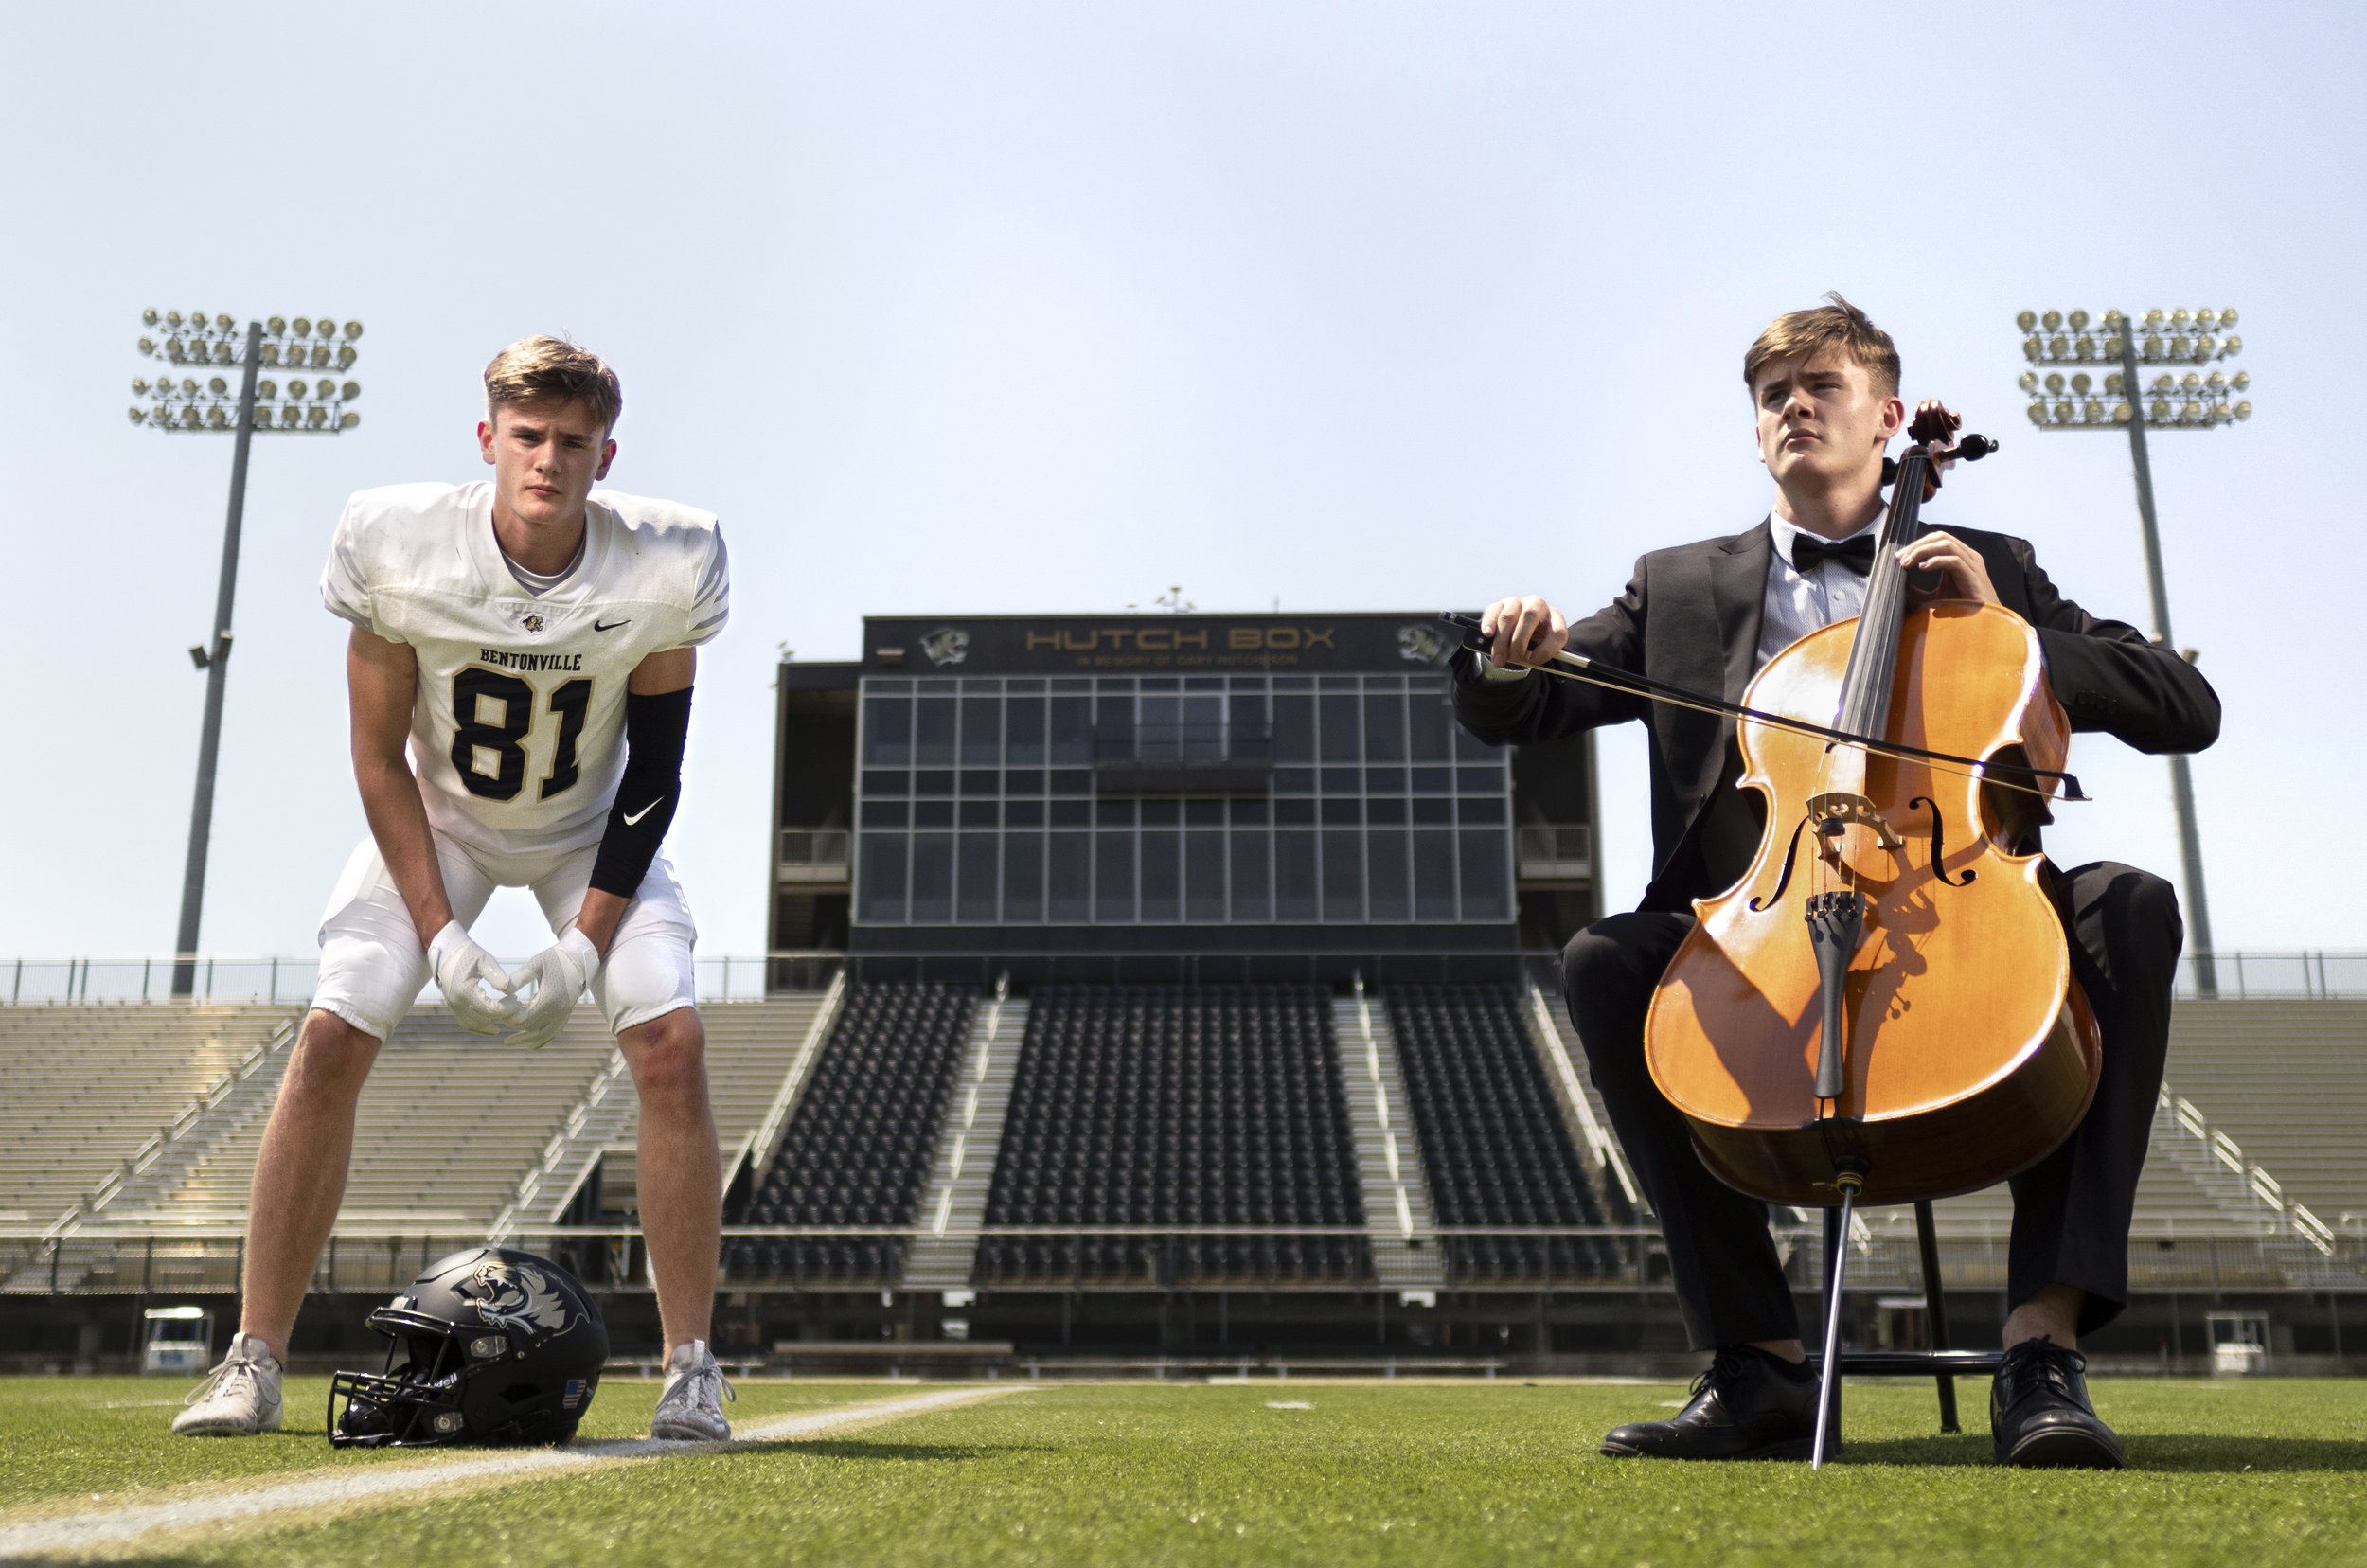  Bentonville senior linebacker Rivers Wiseman poses for a portrait in a composite photo at Tiger Stadium at Bentonville High School in Bentonville, Friday, August 18, 2023. Wiseman is regarded as one of the nation’s top cello players and already has 